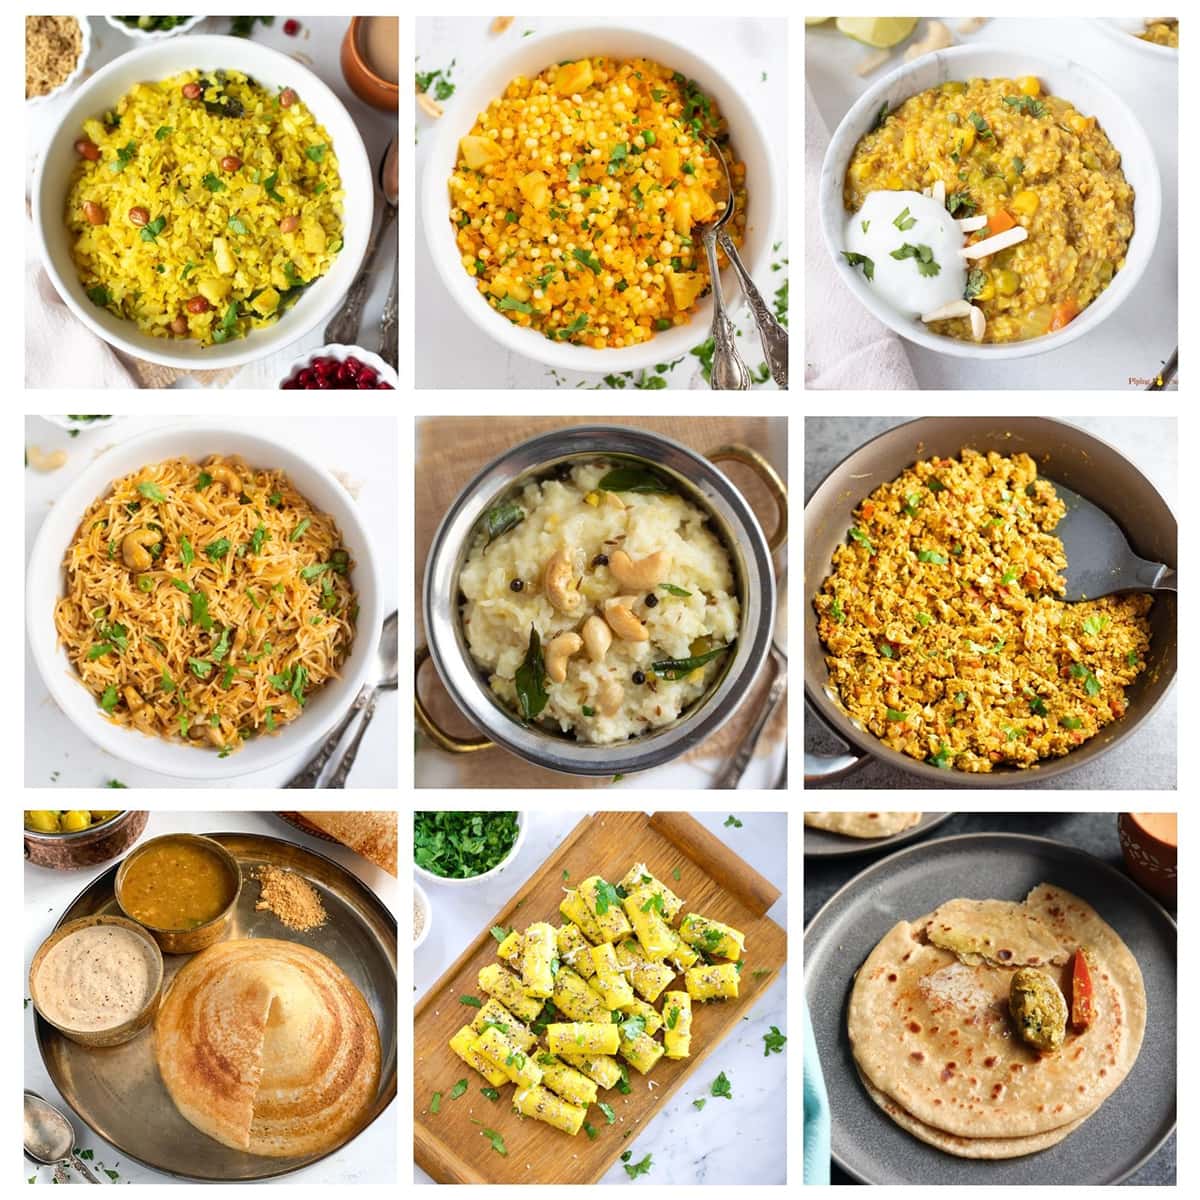 https://pipingpotcurry.com/wp-content/uploads/2021/05/352.-15-Best-Indian-Breakfast-Recipes.jpg